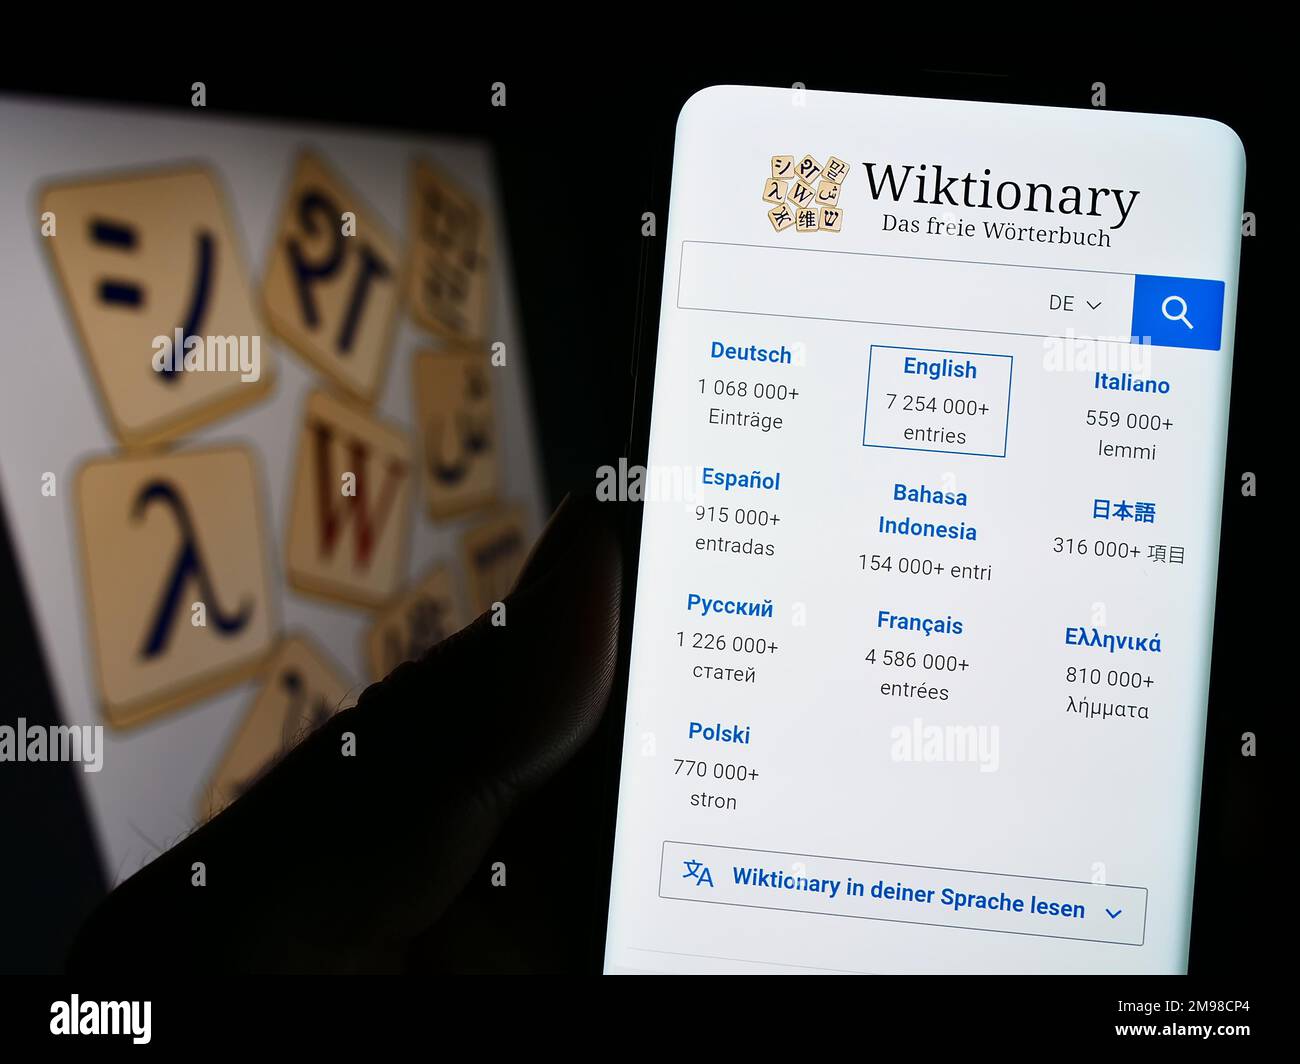 Person holding cellphone with website of online dictionary Wiktionary (Wikimedia) on screen in front of logo. Focus on center of phone display. Stock Photo